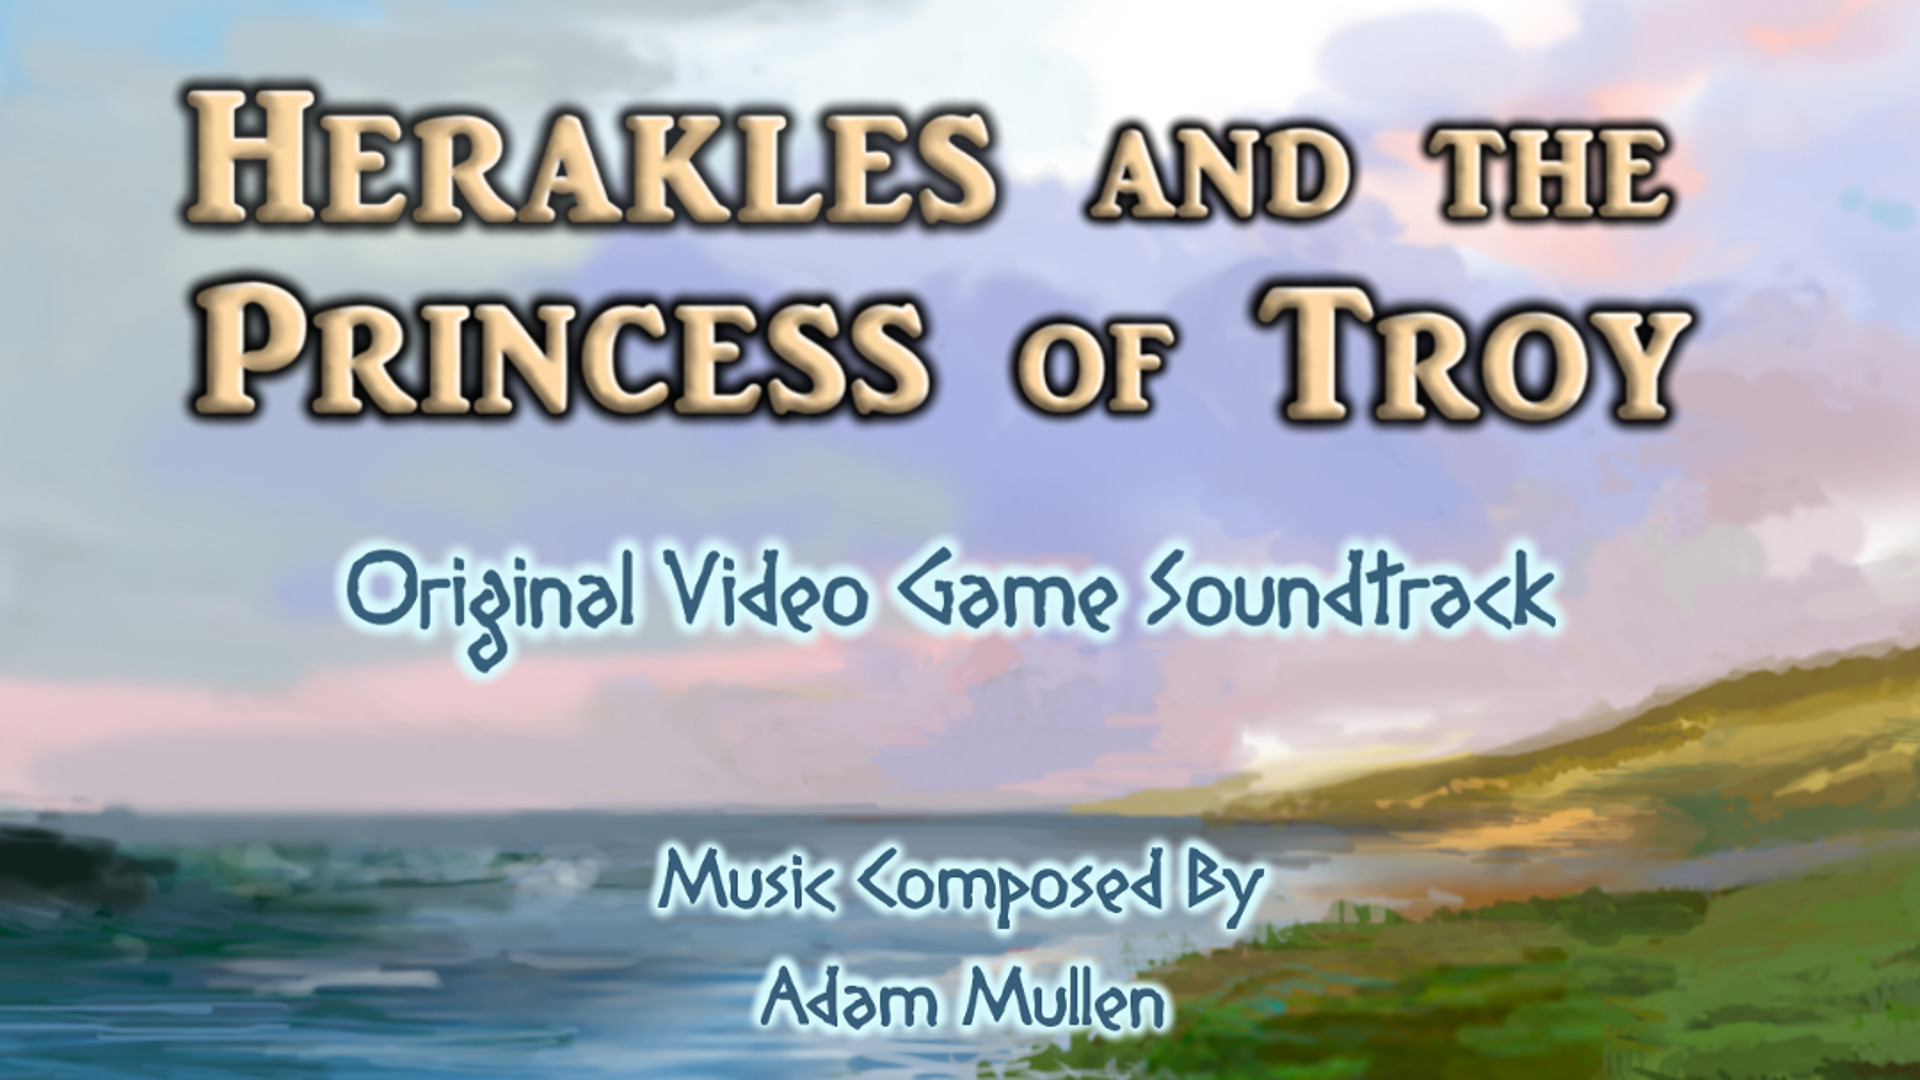 Herakles and the Princess of Troy OST Featured Screenshot #1